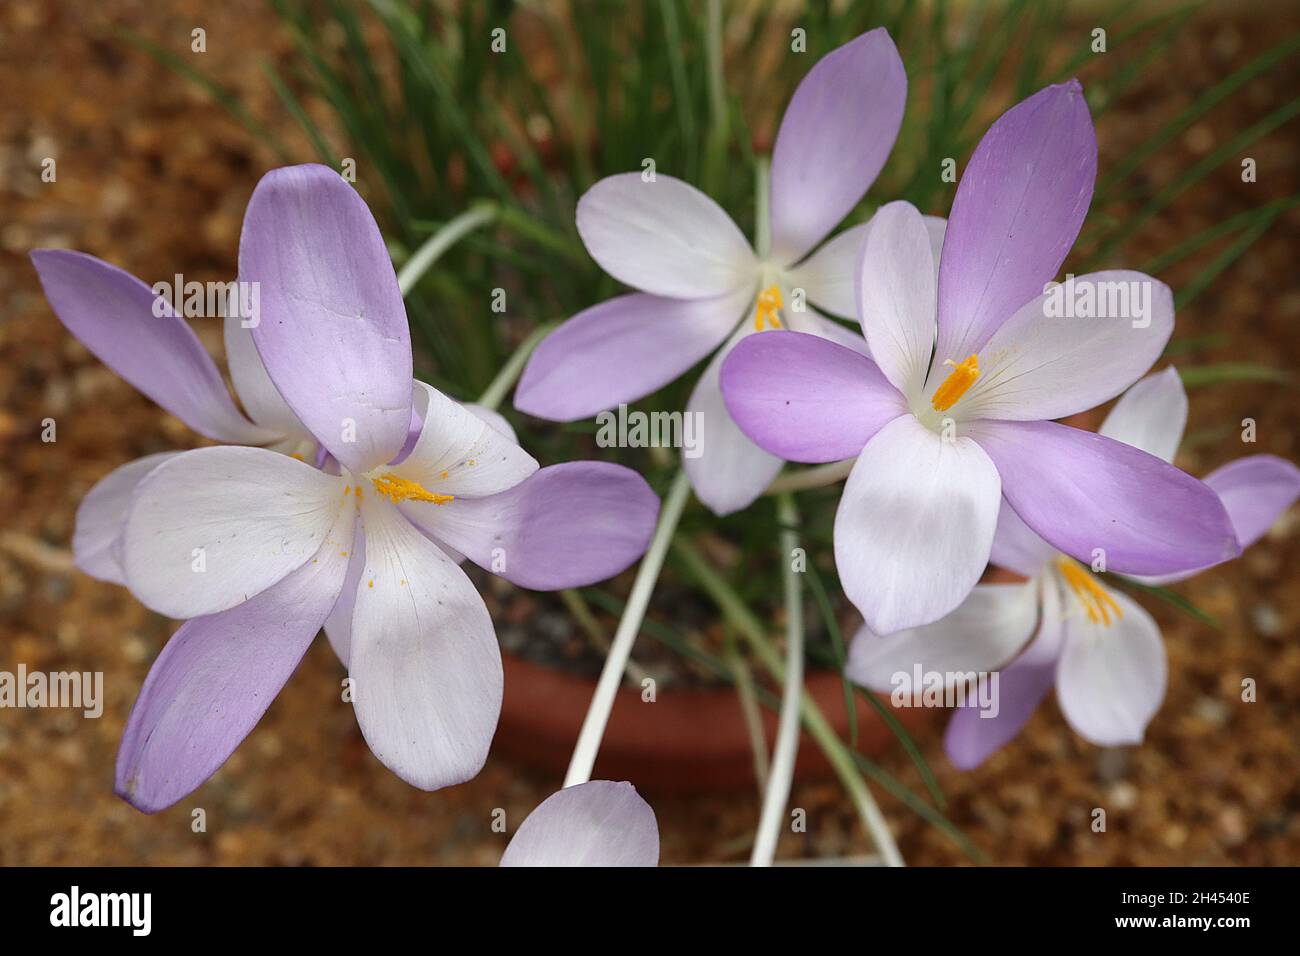 Crocus goulimyi fall crocus – alternate violet and white flared funnel-shaped flowers on white stems,  October, England, UK Stock Photo